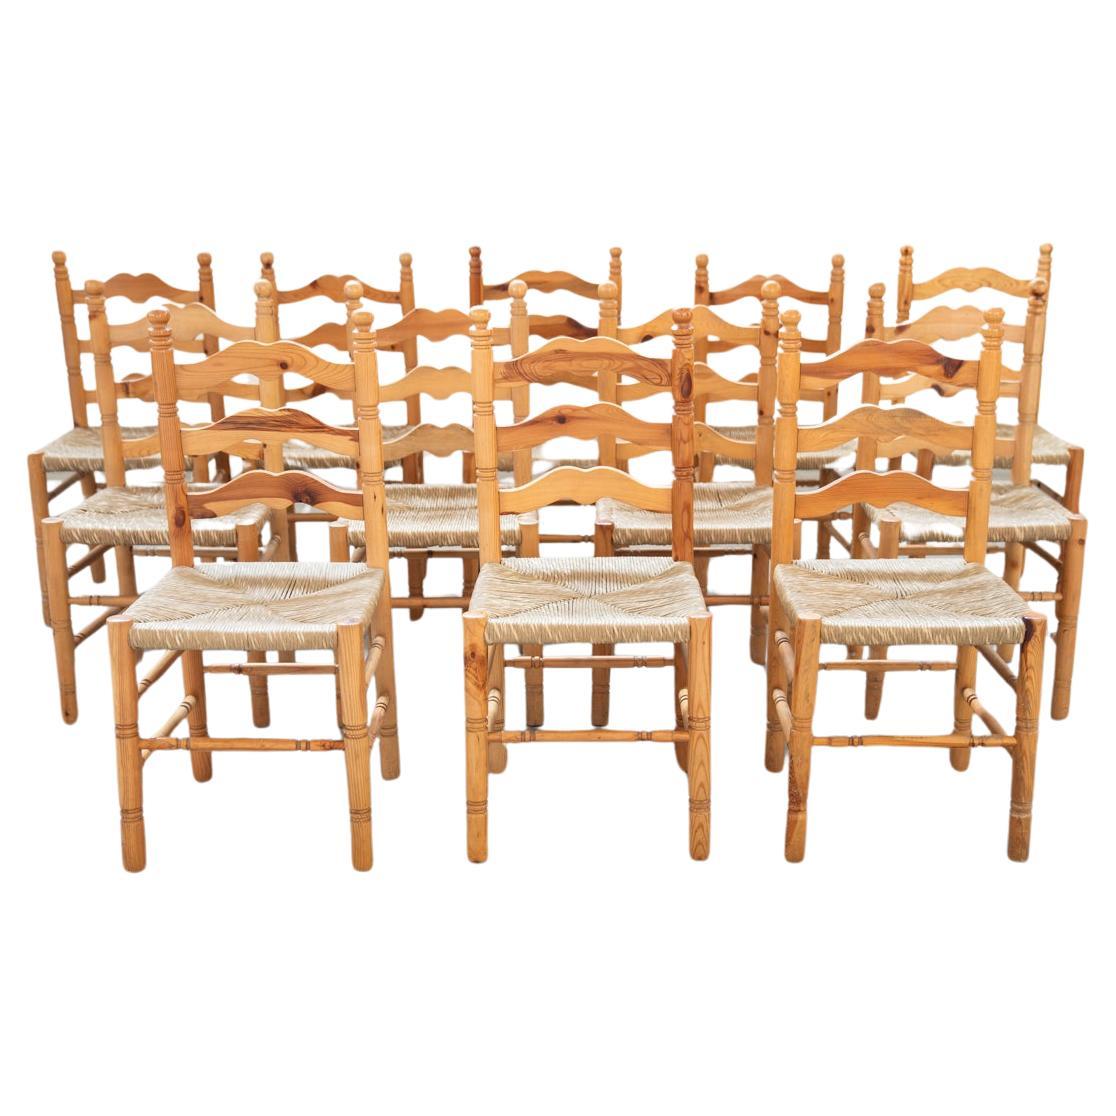 Friulian rustic chairs with turned legs, set of 12, 1980-1990 For Sale